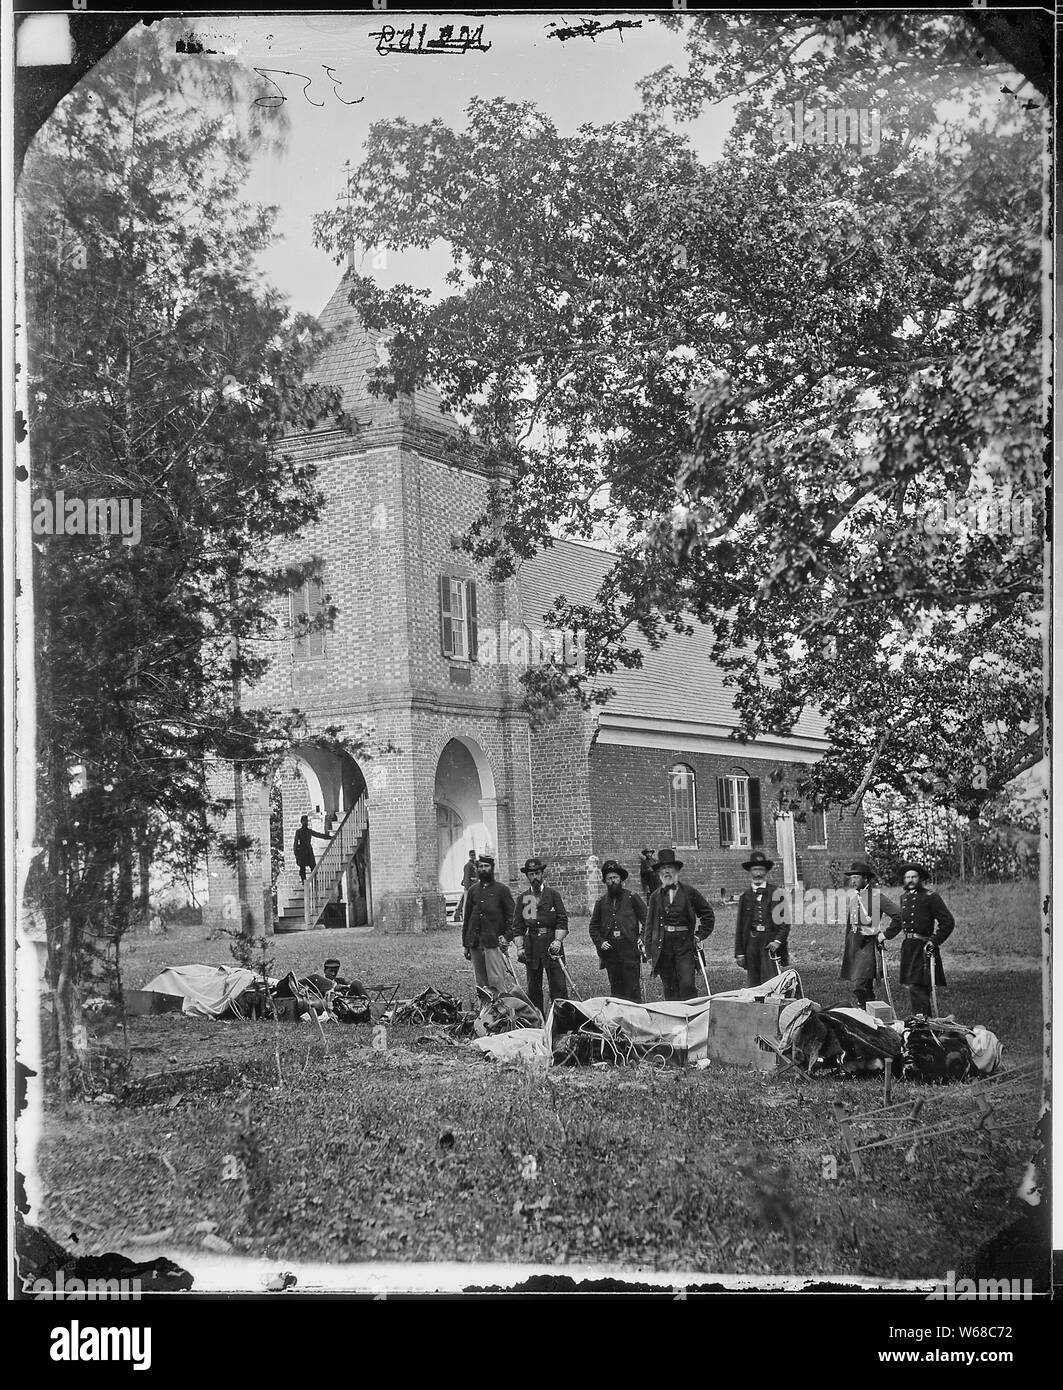 St. Peter's Church, near the White House, Virginia. (where G. Washington may have been married to Martha). Personnel as given in Pictorial History of Civil War, Review of Reviews, 1911, left to right: Maj. A.M. Clark, volunteer A.D.C.; Lt. Col. J.H. Taylor, A.G.; Capt. F.N. Clarke, Chief of Arty.; General E.V. Sumner, Lt. Col. J. F. Hammond, Medical Director; Capt. Pease, Minnesota Vols., Chief of commissary; Capt. Gabriel Grant. Stock Photo